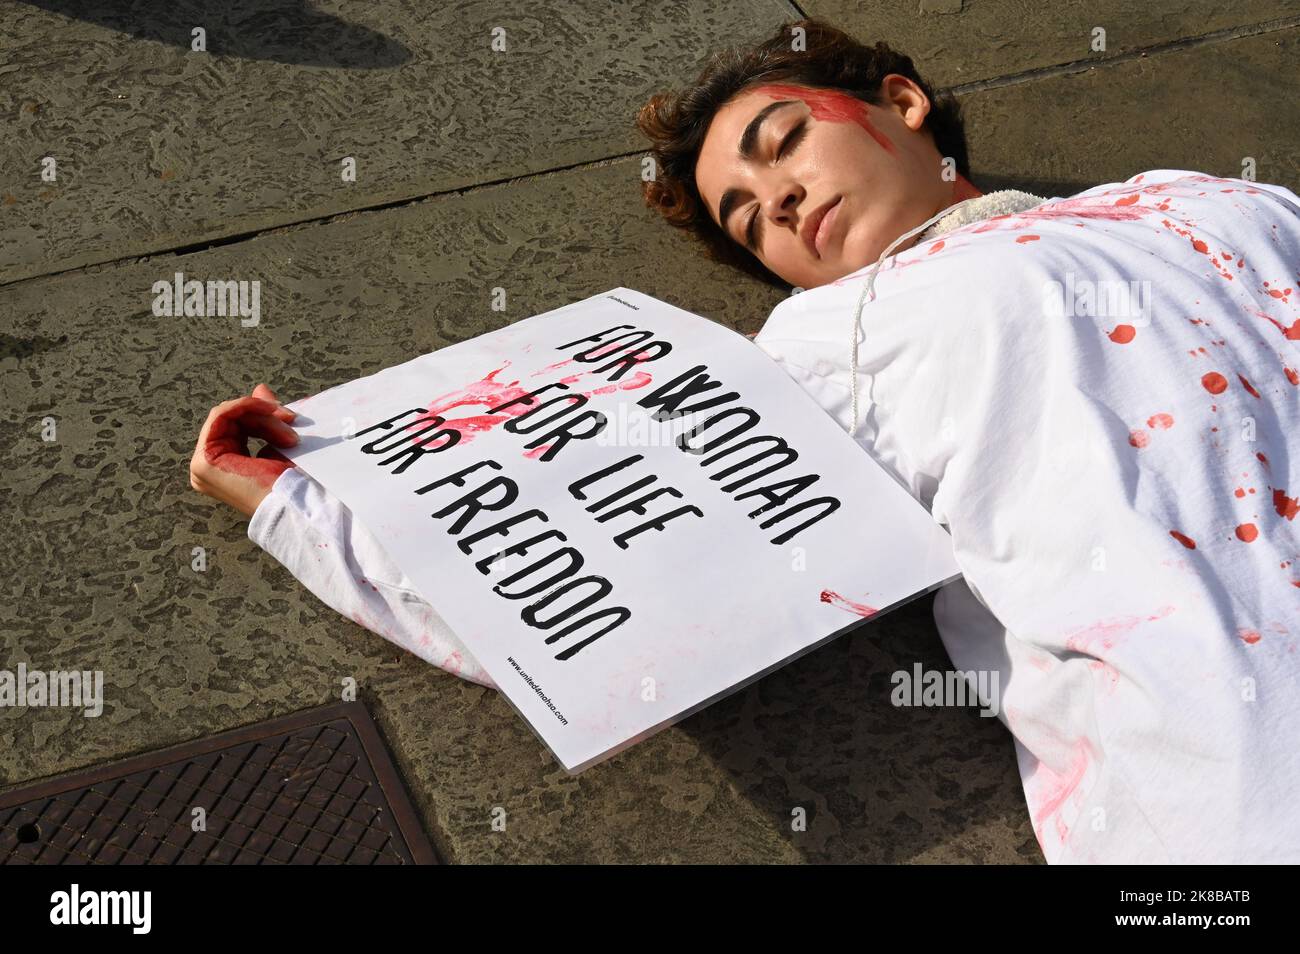 London, UK. 22nd Oct 2022. Protests continued in Central London following the death of Mahsa Alnini at the hands of the morality police in Tehran, Iran. Credit: michael melia/Alamy Live News Stock Photo